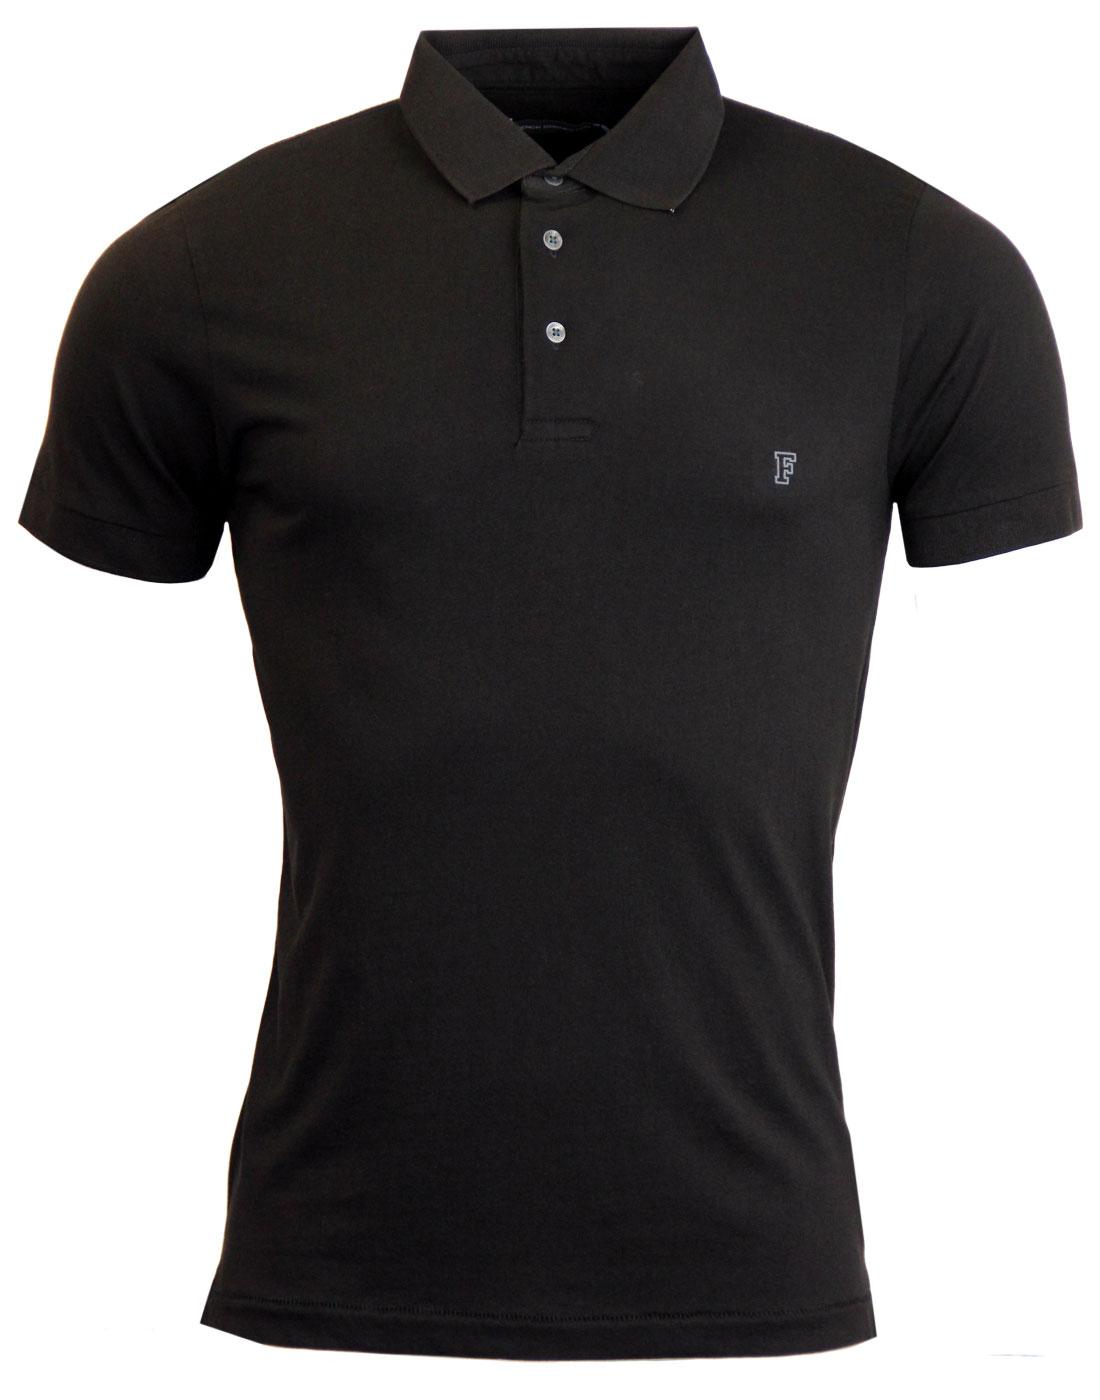 FRENCH CONNECTION Sneezy Retro Mod Jersey Polo Shirt in Black